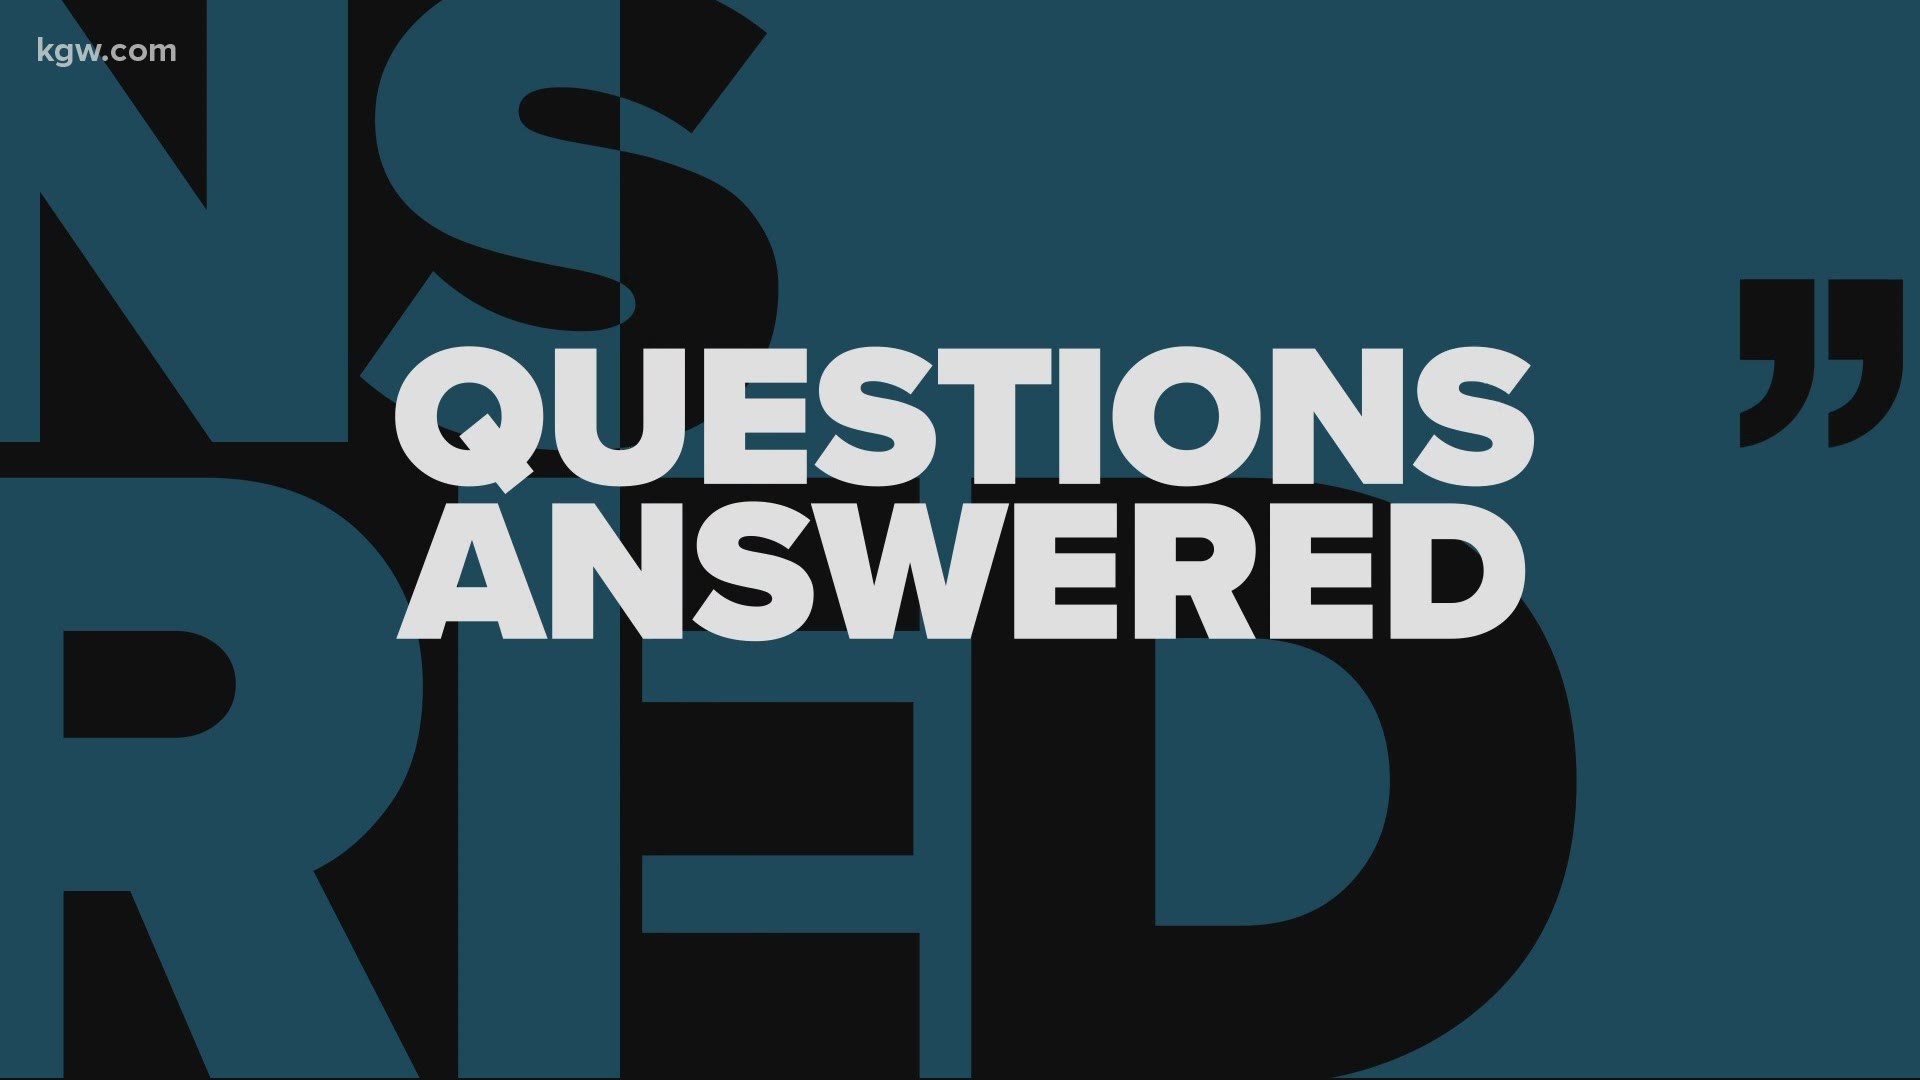 We get lots of questions at the #HeyDan. So here are some thoughtful answers to some random questions.